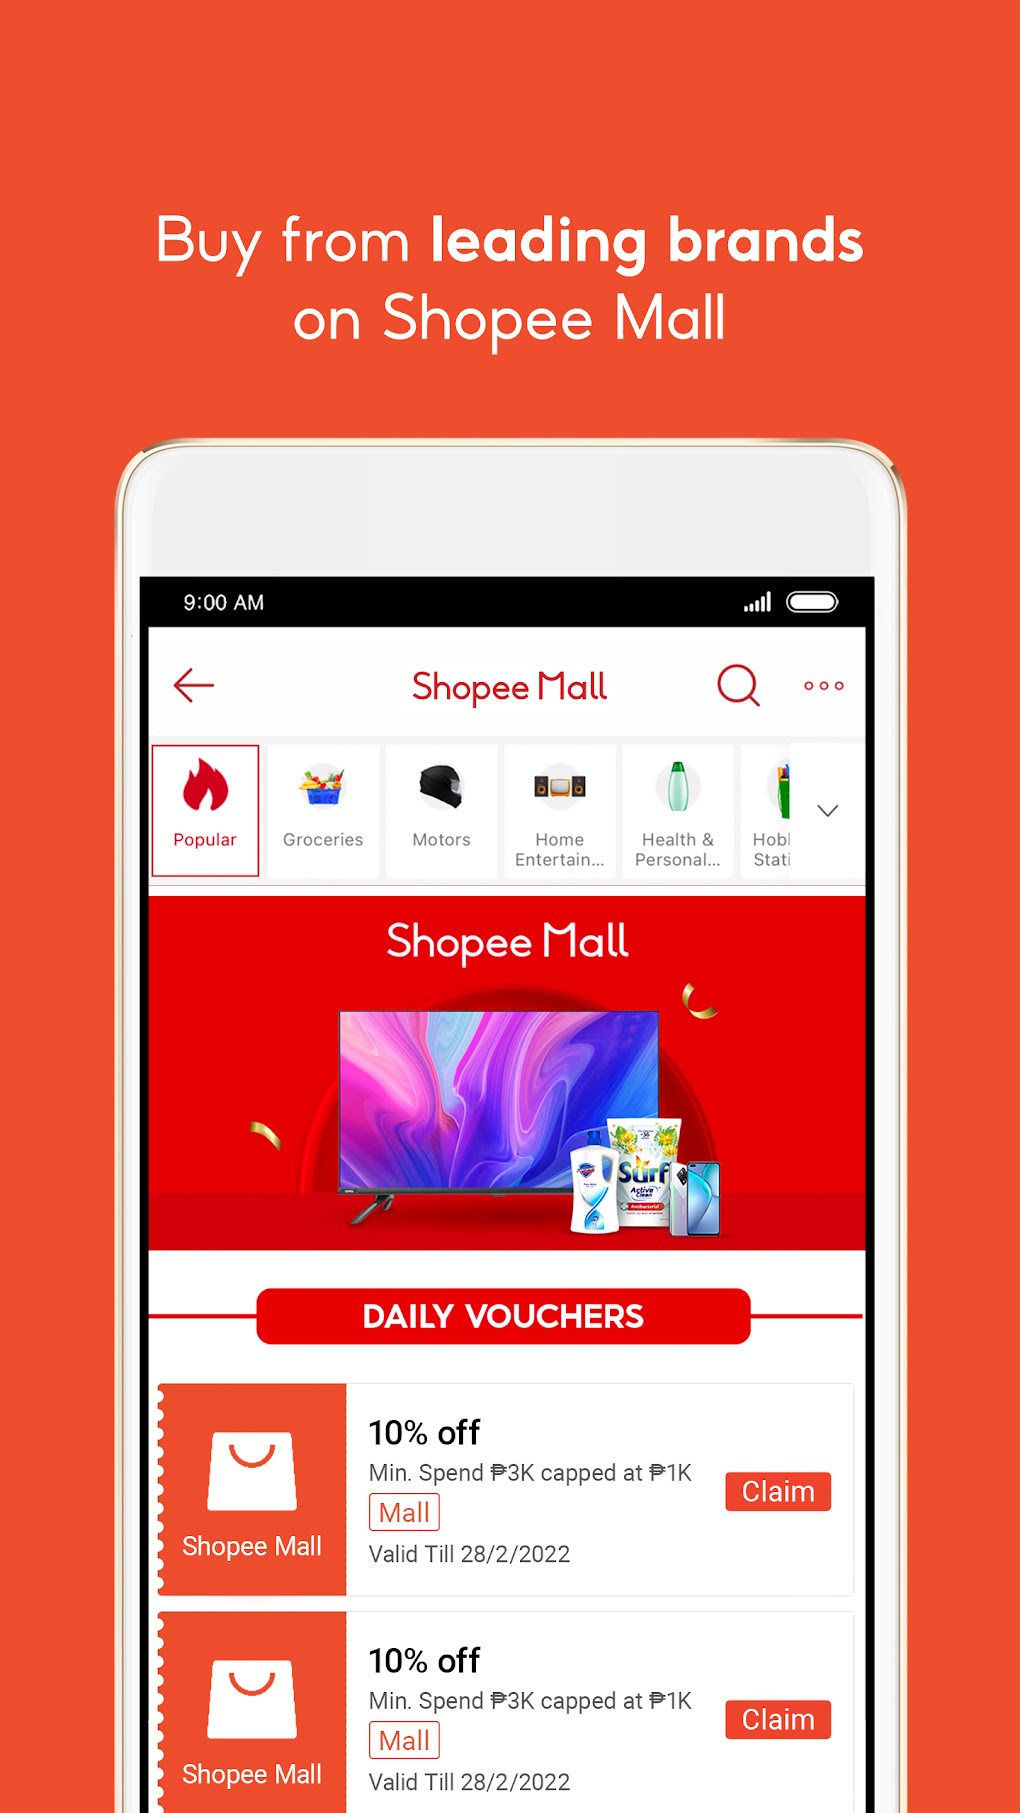 Download Shopee APP: Best Online Shopping Platform in the Philippines